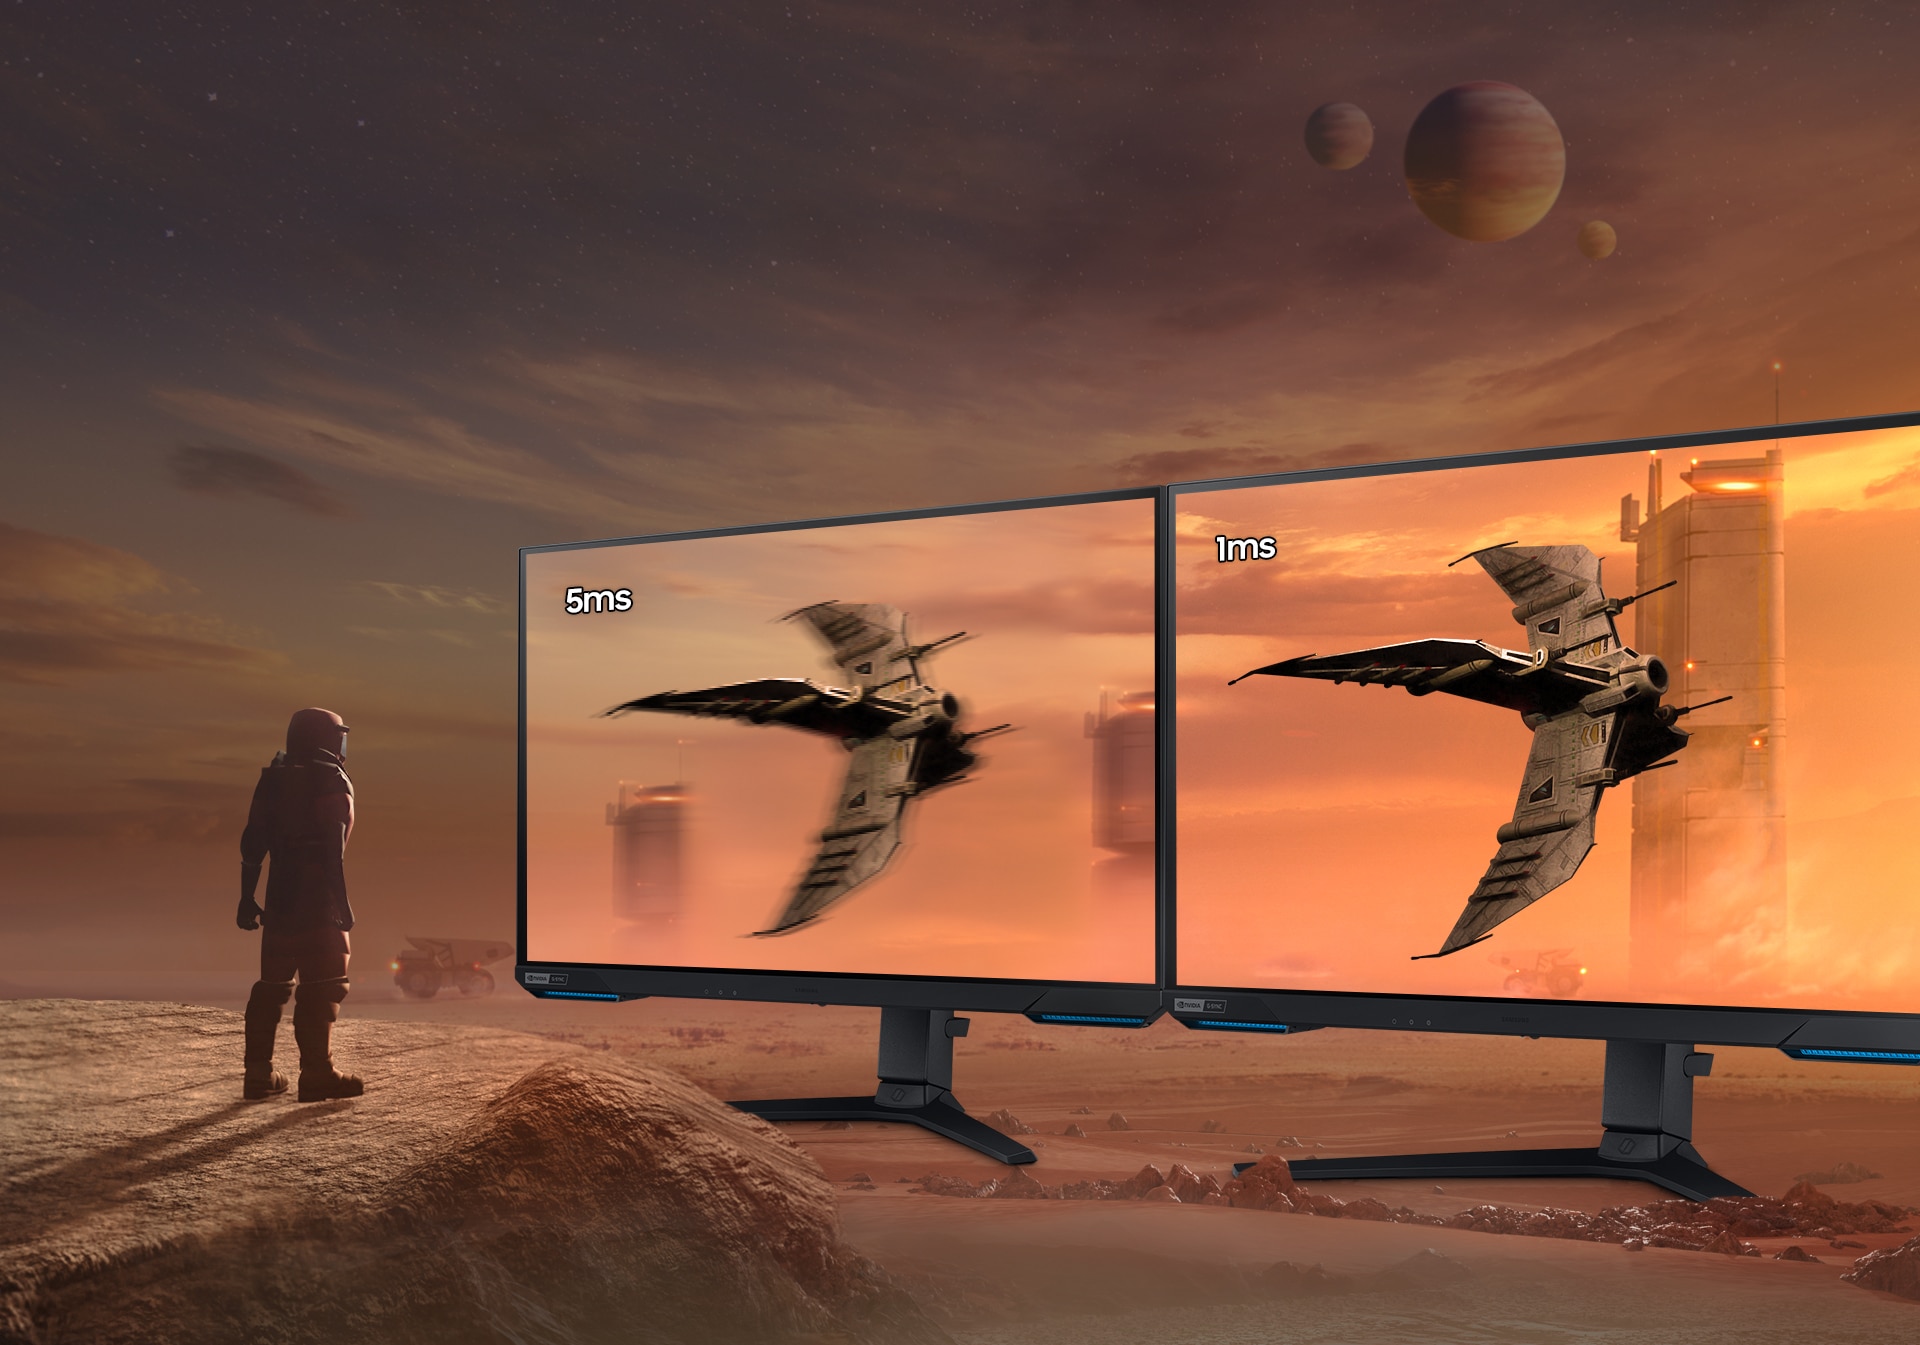 An astronaut explorer appears on a cliff on an orange and gray desert planet. To their right is two G70A monitors showing the same spaceship flying past windowless buildings. The left monitor appears blurry and has the words “5ms” above it while the right appears smooth and shows the words “1ms” above it